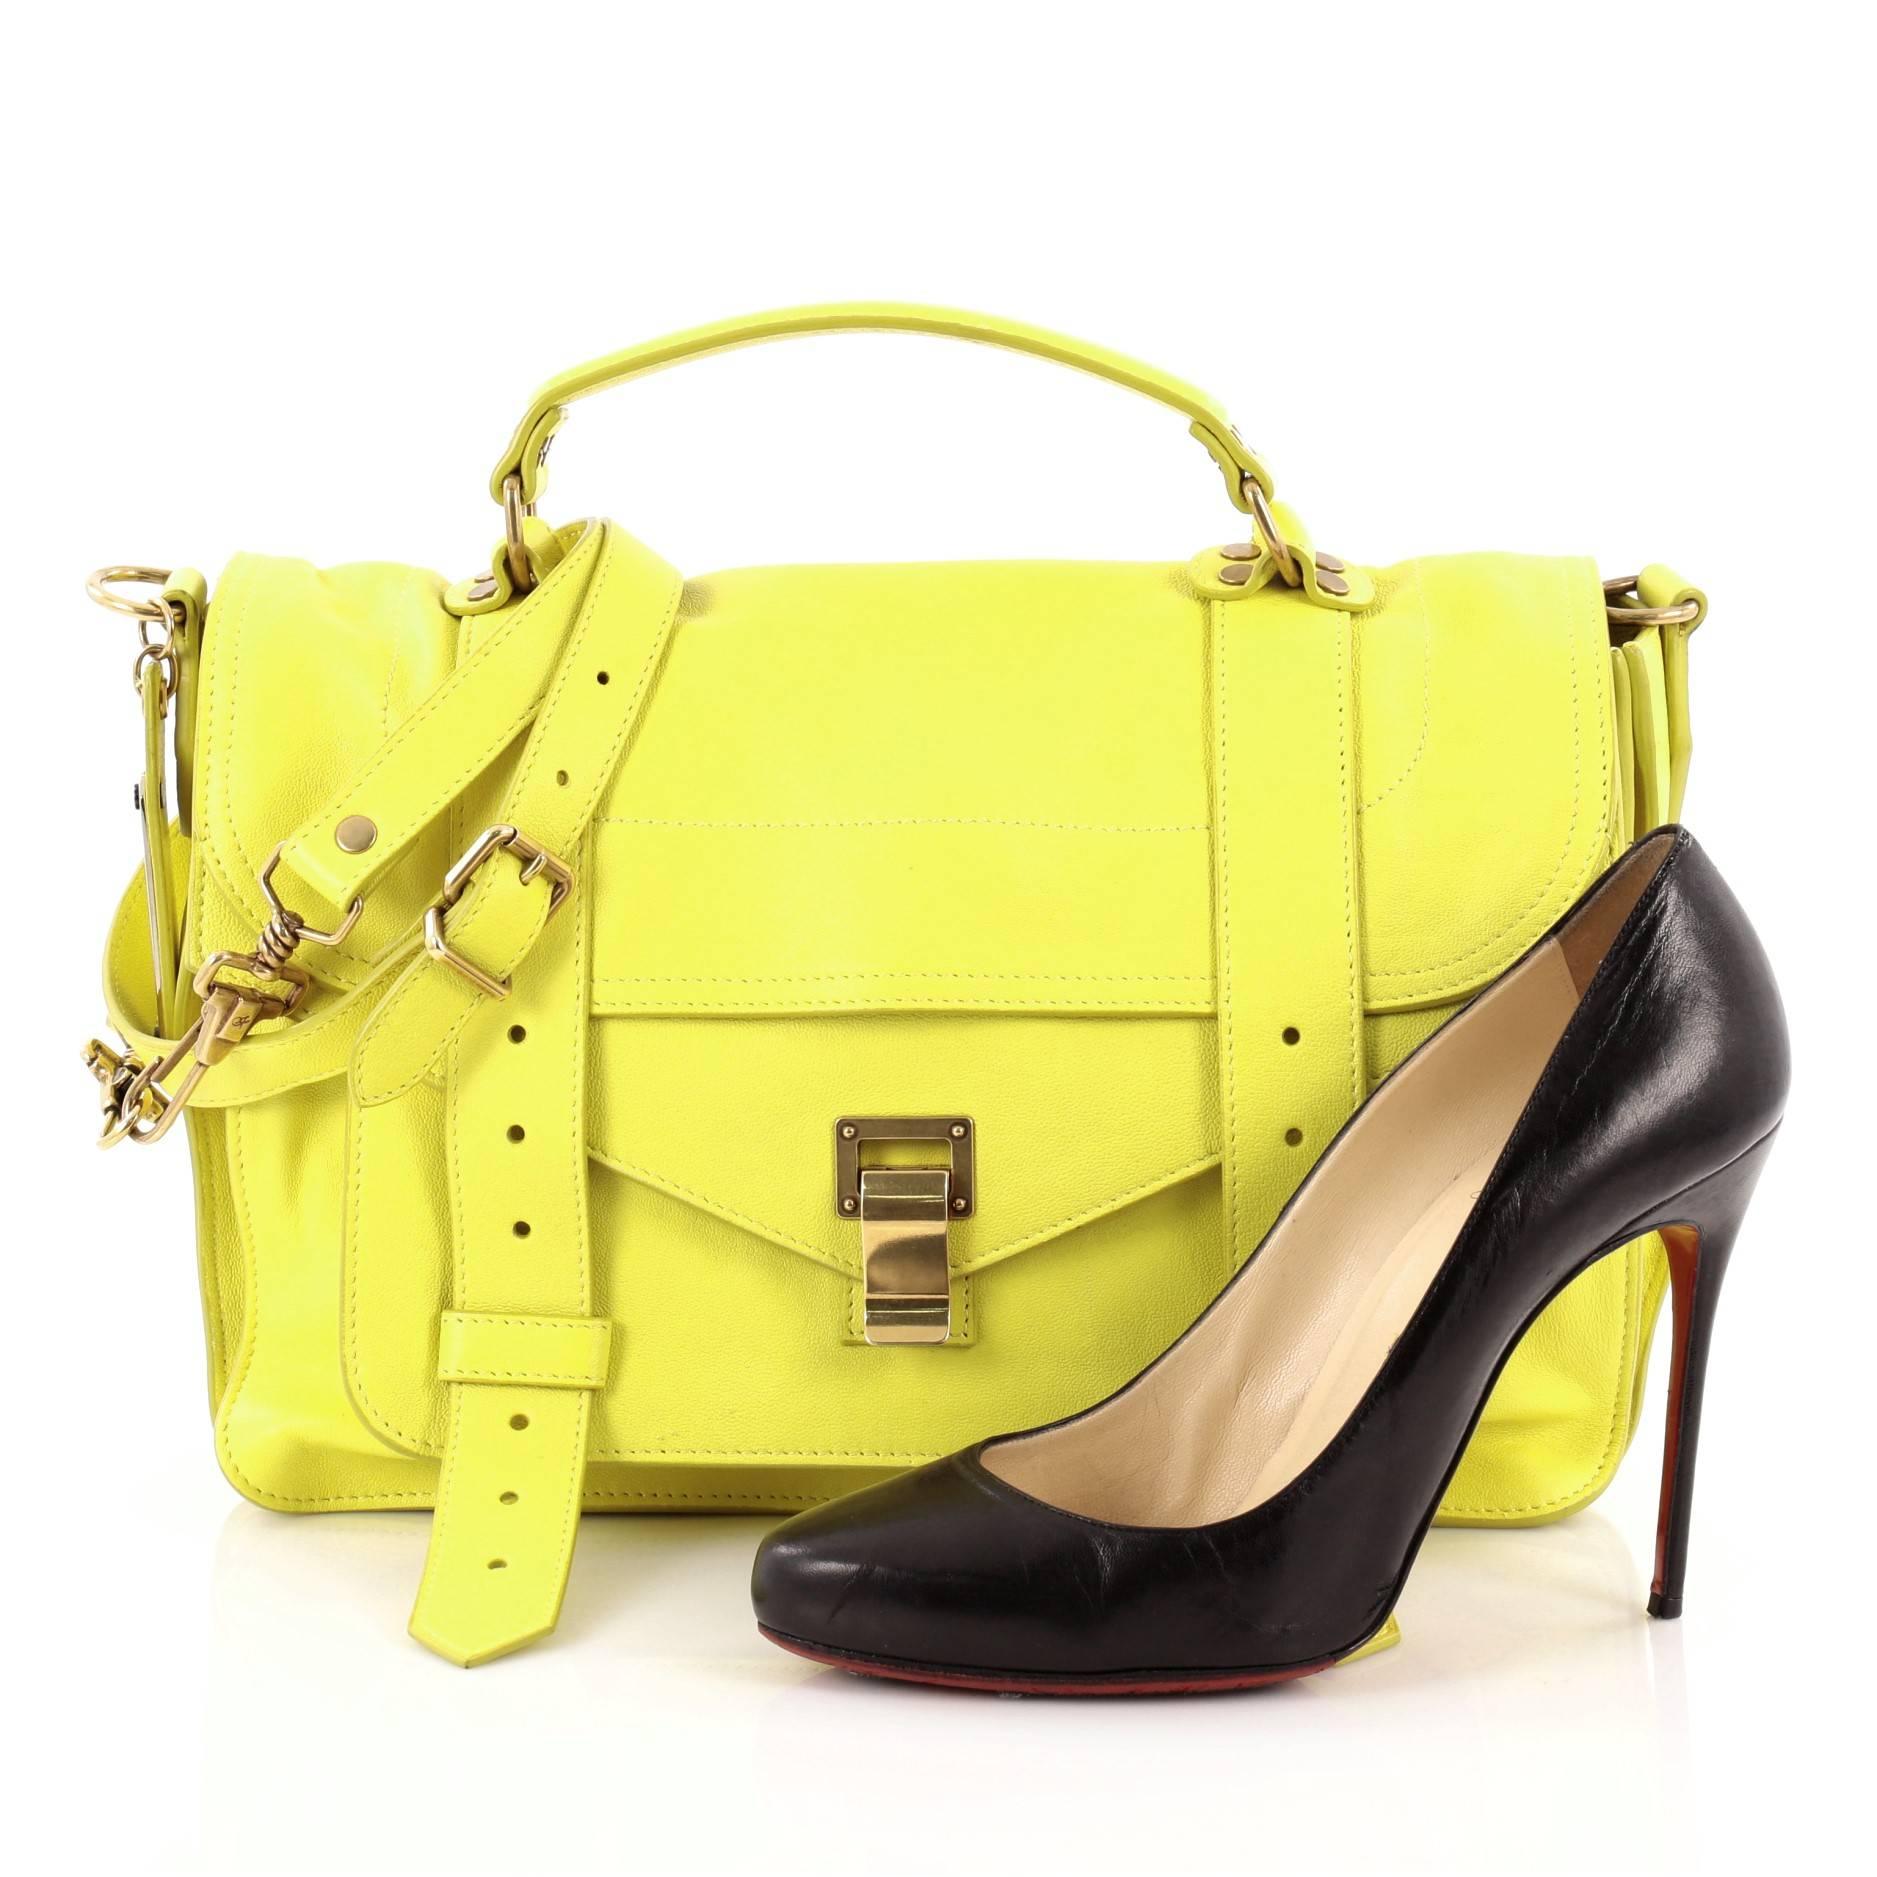 This authentic Proenza Schouler PS1 Satchel Leather Medium is the ideal way to travel with style and functionality. Constructed from neon lime leather, this popular satchel features an envelope-style front flap with two straps that slide through